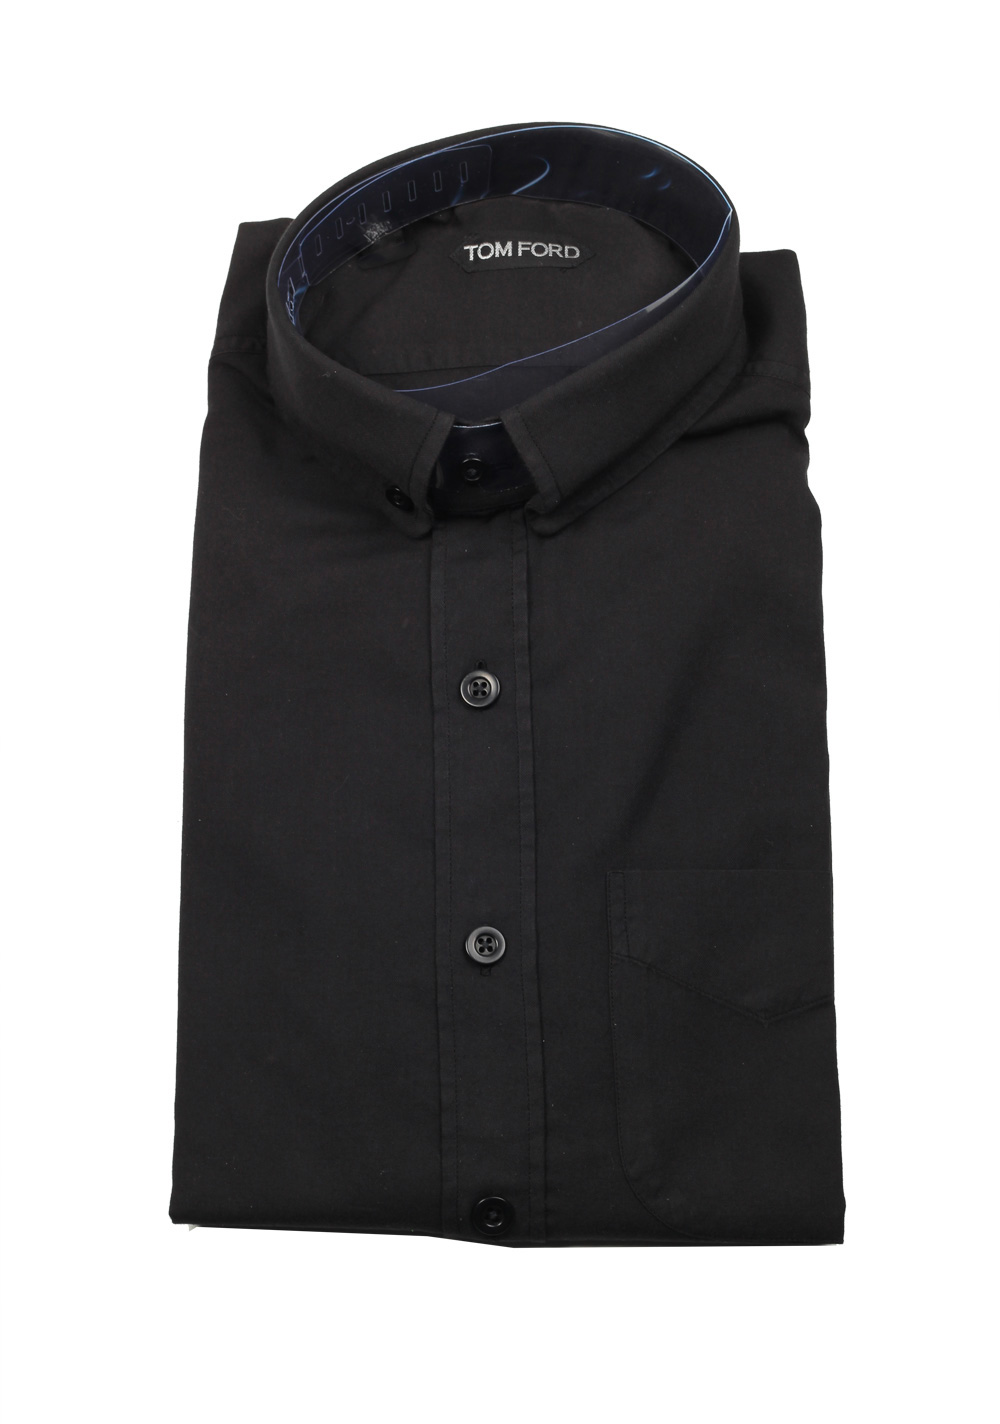 TOM FORD Solid Black Casual Button Down Shirt Size 39 / 15,5 U.S. | Costume Limité